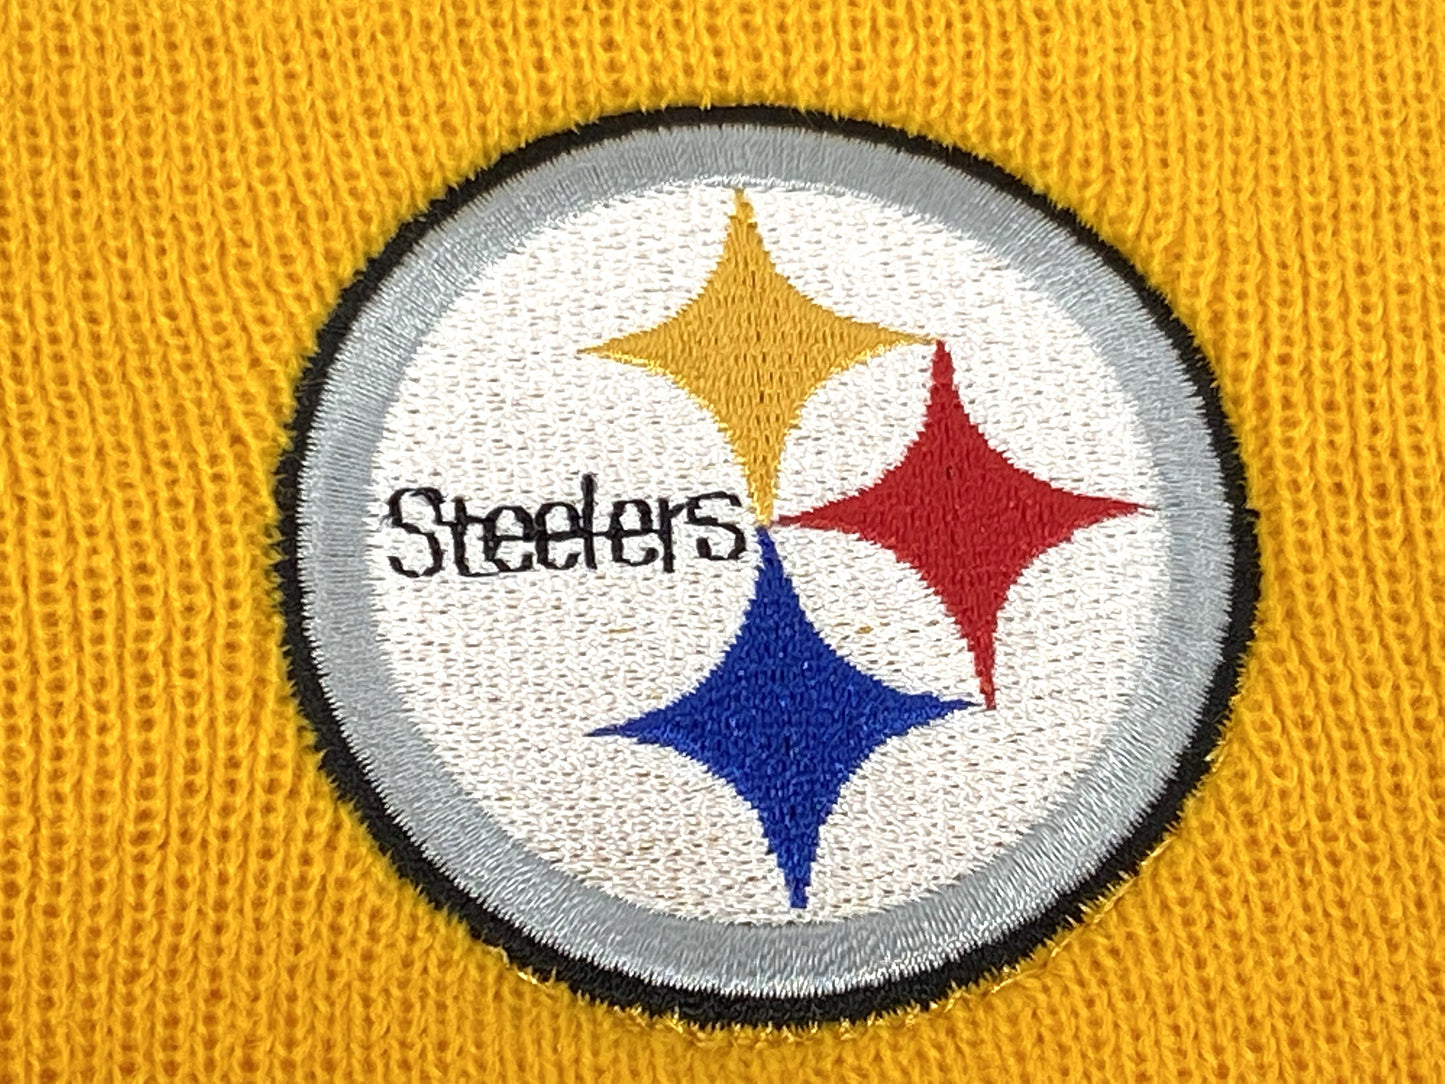 Pittsburgh Steelers Vintage NFL Cuffed Knit Logo Hat